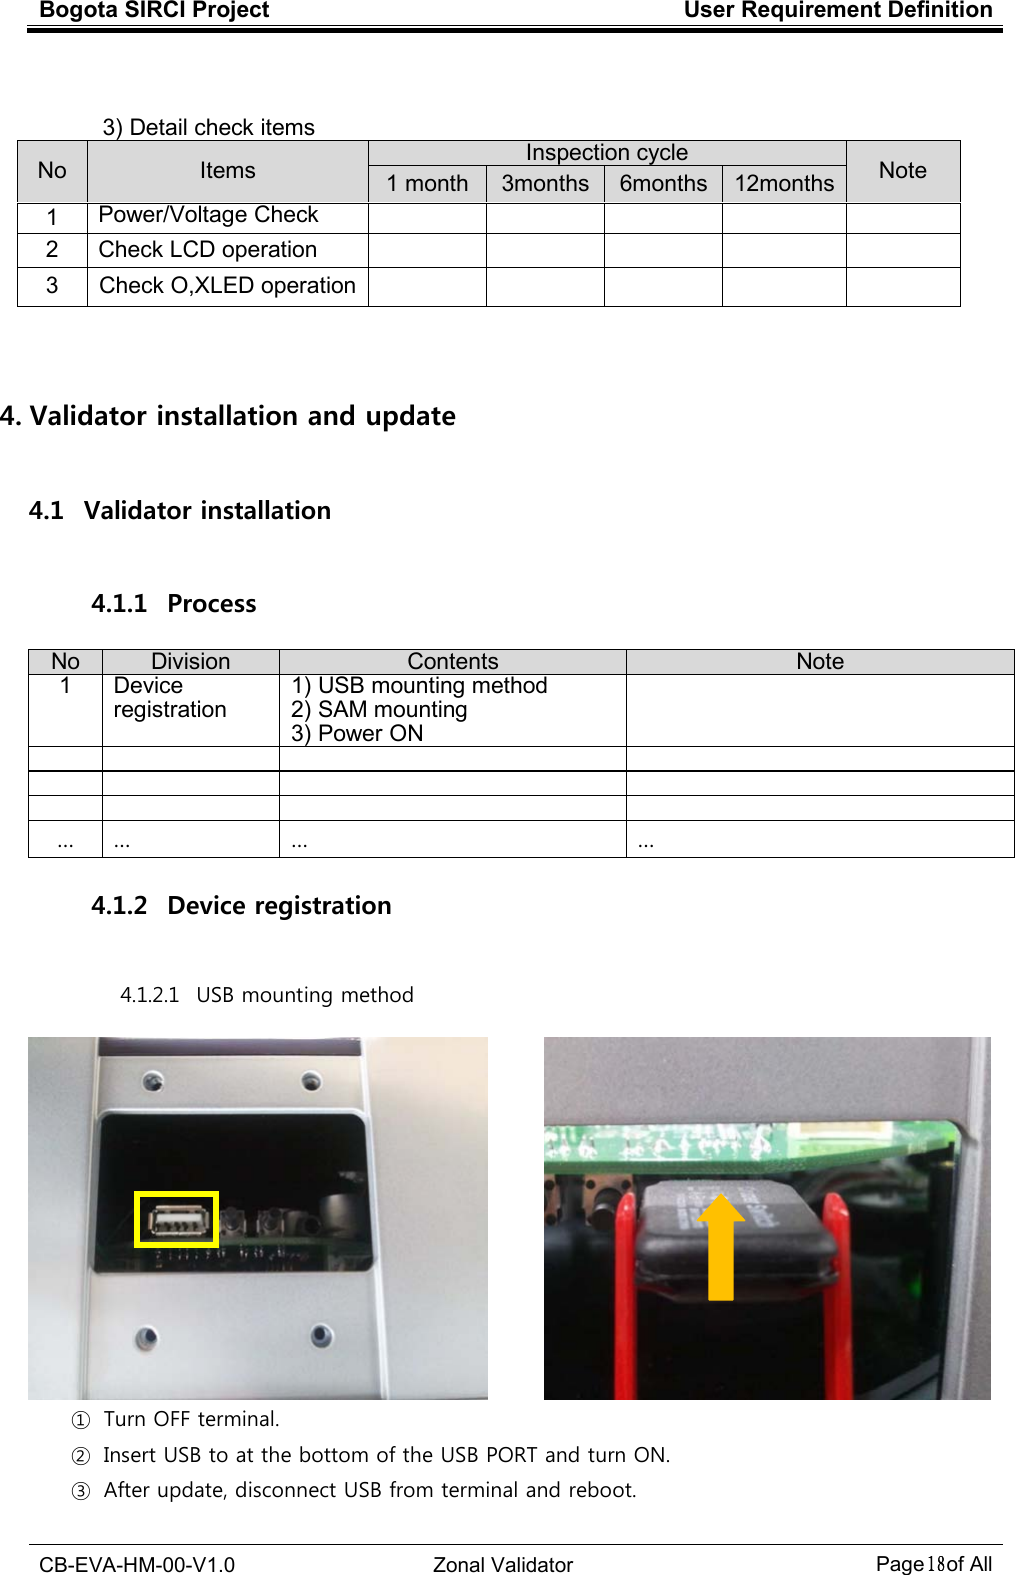 Bogota SIRCI Project  User Requirement Definition  CB-EVA-HM-00-V1.0  Zonal Validator Page１８１８１８１８ of All    3) Detail check items No  Items Inspection cycle Note 1 month 3months 6months 12months 1 Power/Voltage Check      2  Check LCD operation      3  Check O,XLED operation        4. Validator installation and update 4.1   Validator installation 4.1.1   Process No Division Contents Note 1 Device registration  1) USB mounting method 2) SAM mounting 3) Power ON              … … … … 4.1.2   Device registration 4.1.2.1   USB mounting method        ① Turn OFF terminal. ② Insert USB to at the bottom of the USB PORT and turn ON. ③ After update, disconnect USB from terminal and reboot. 